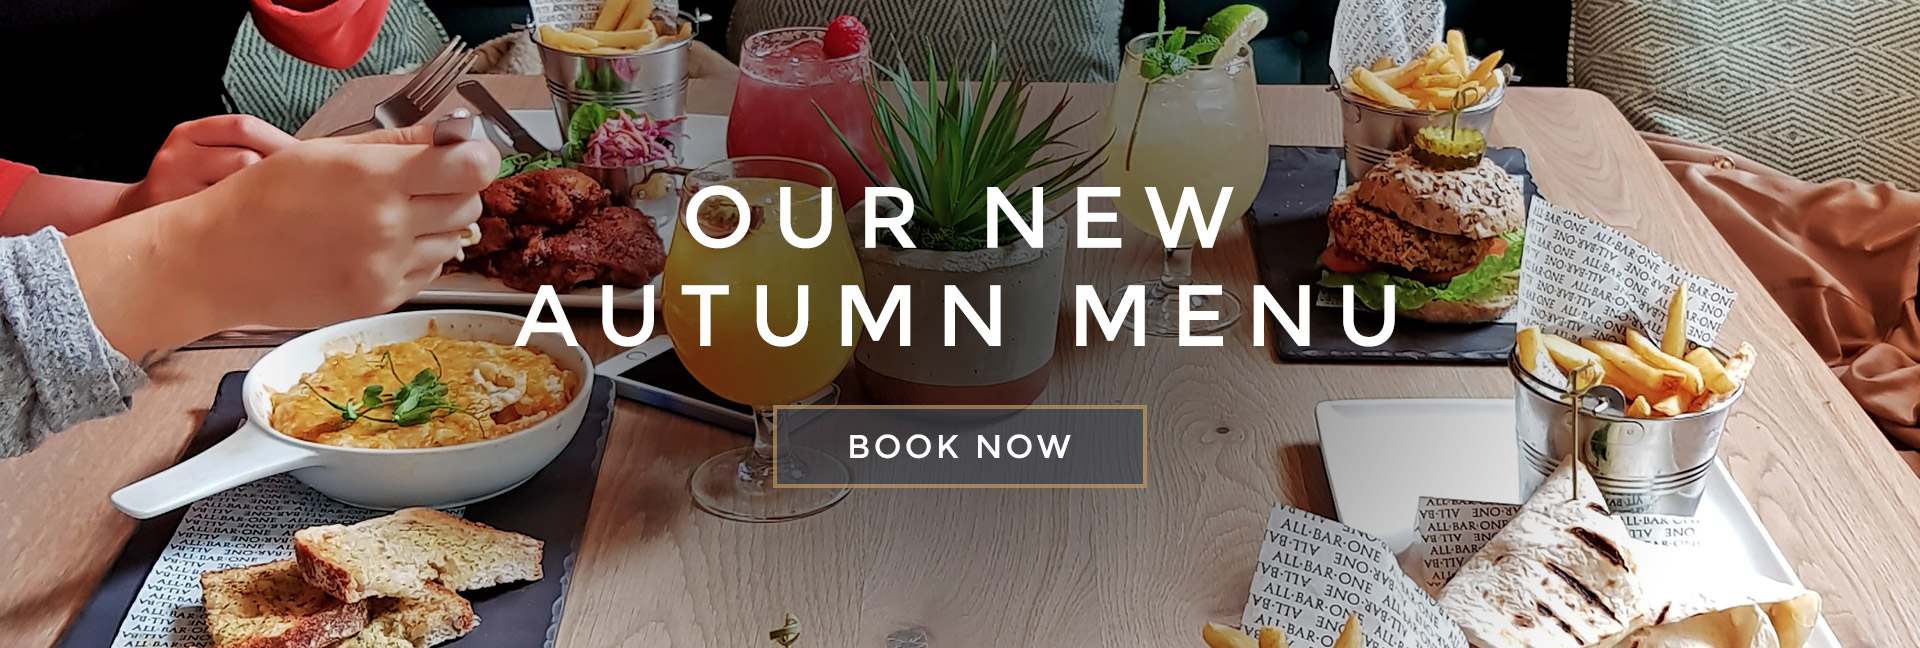 Our new Autumn menu at All Bar One Greek Street Leeds - Book now